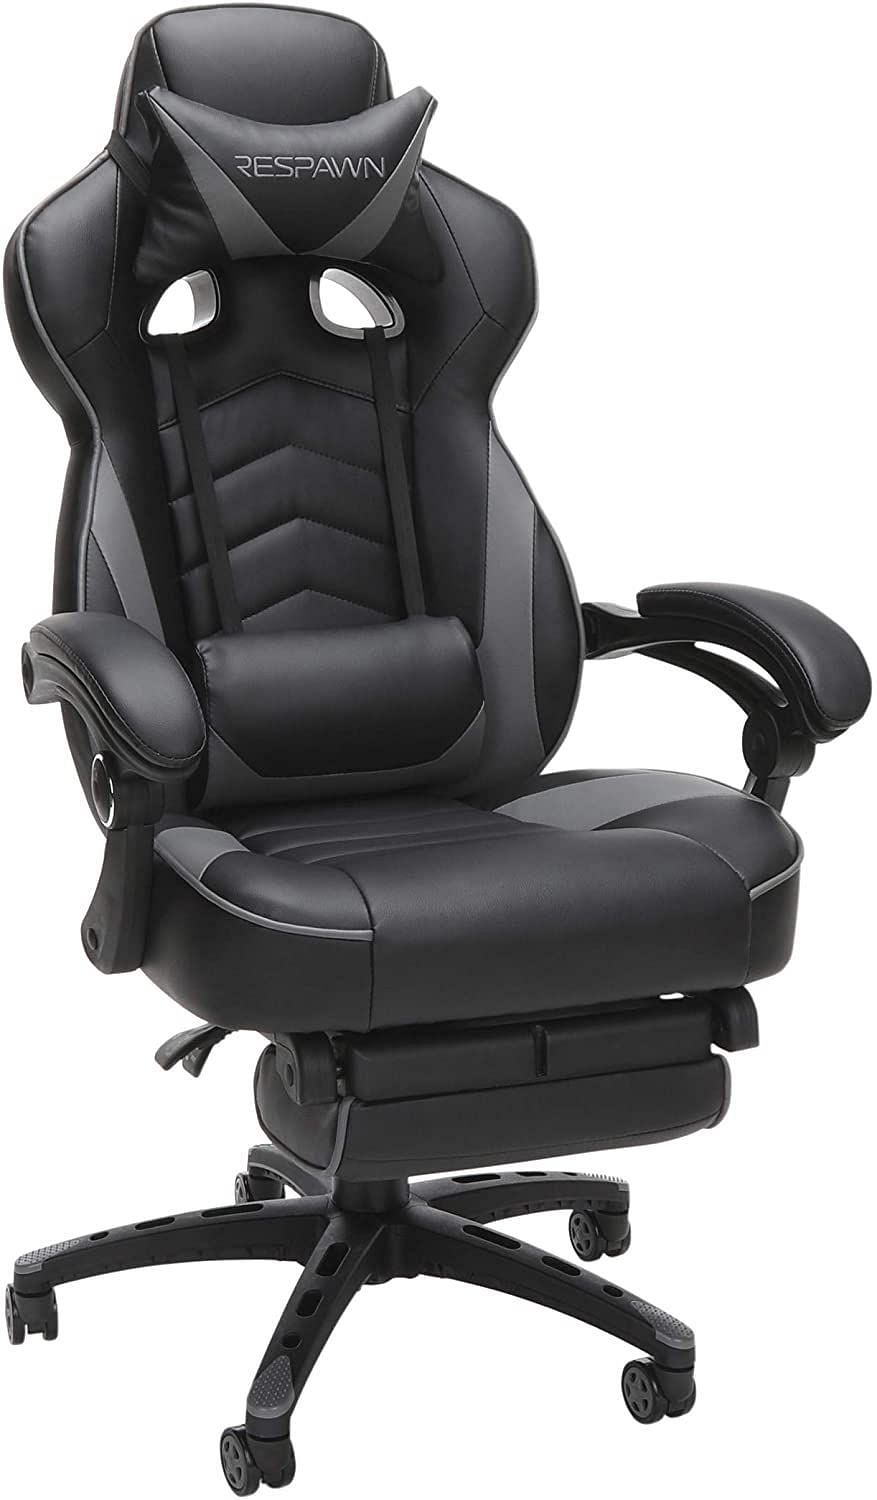 The recliner gaming chair by RESPAWN (Image via Amazon)